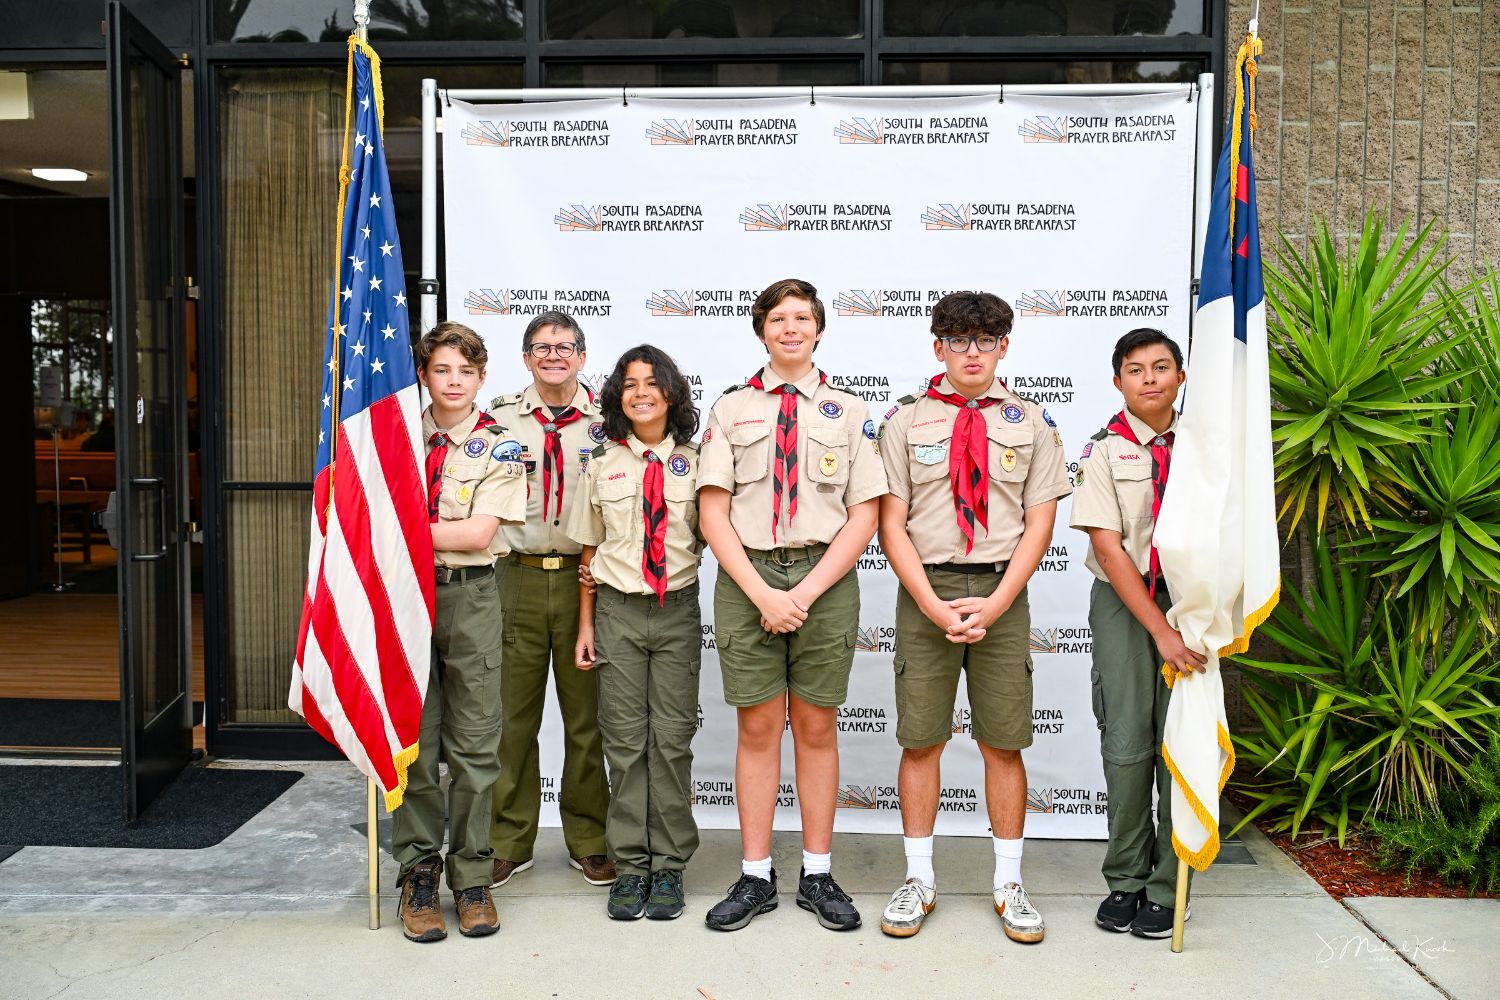 PHOTO: J. Mike Kwok |  South Pasadenan |  Boy Scout Troop 333 during the prayer breakfast to perform the Color Guard ceremony.